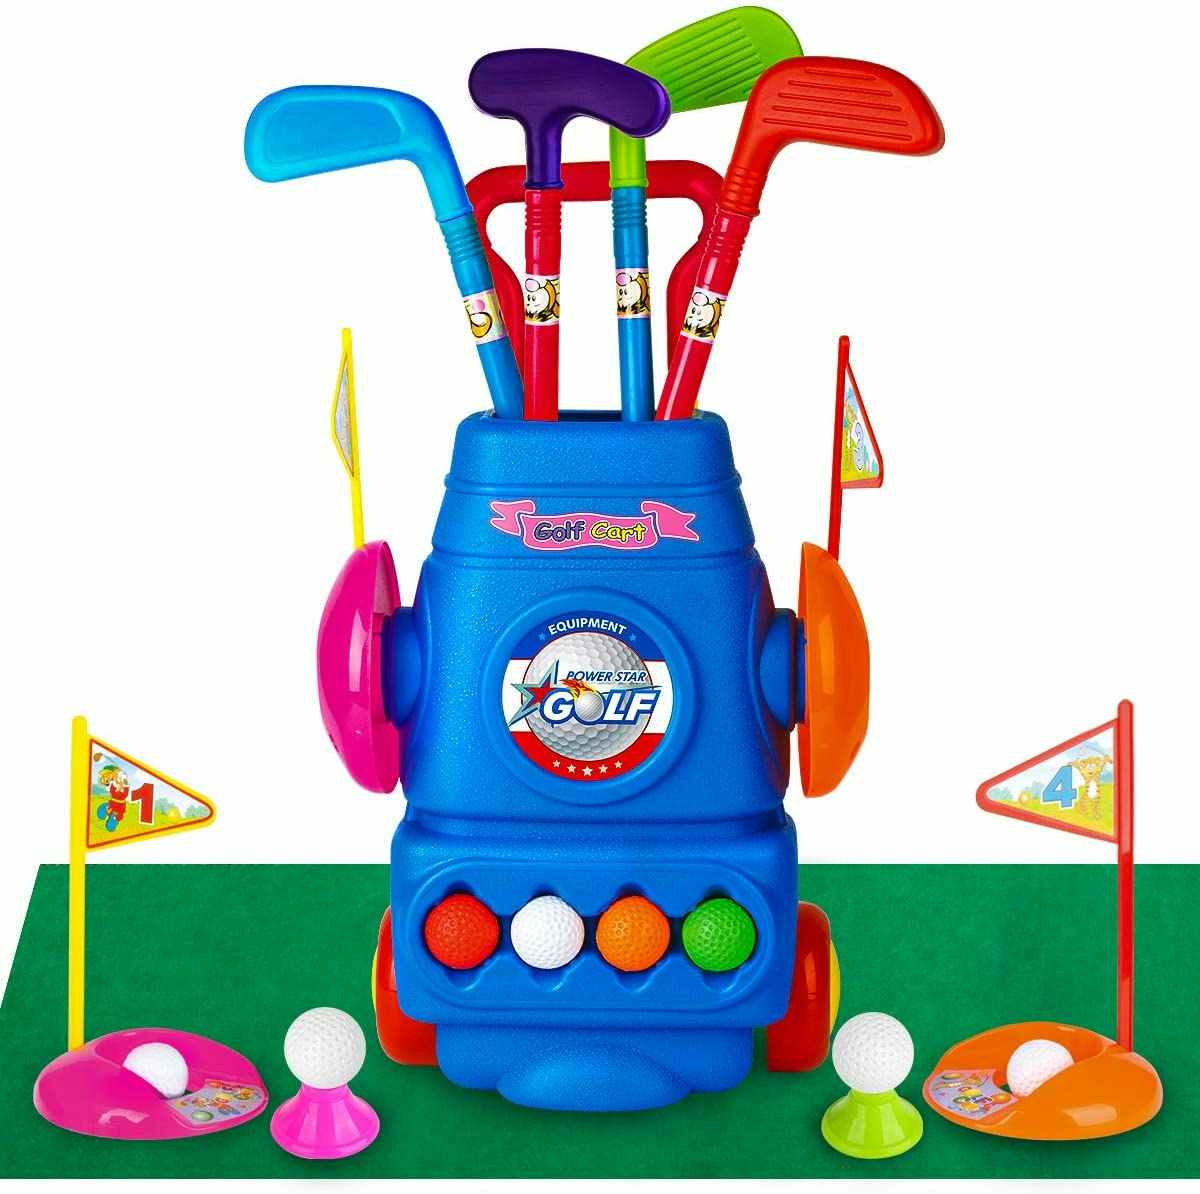 A Meland Kids Golf Club Set staged on a green floor with a white background.